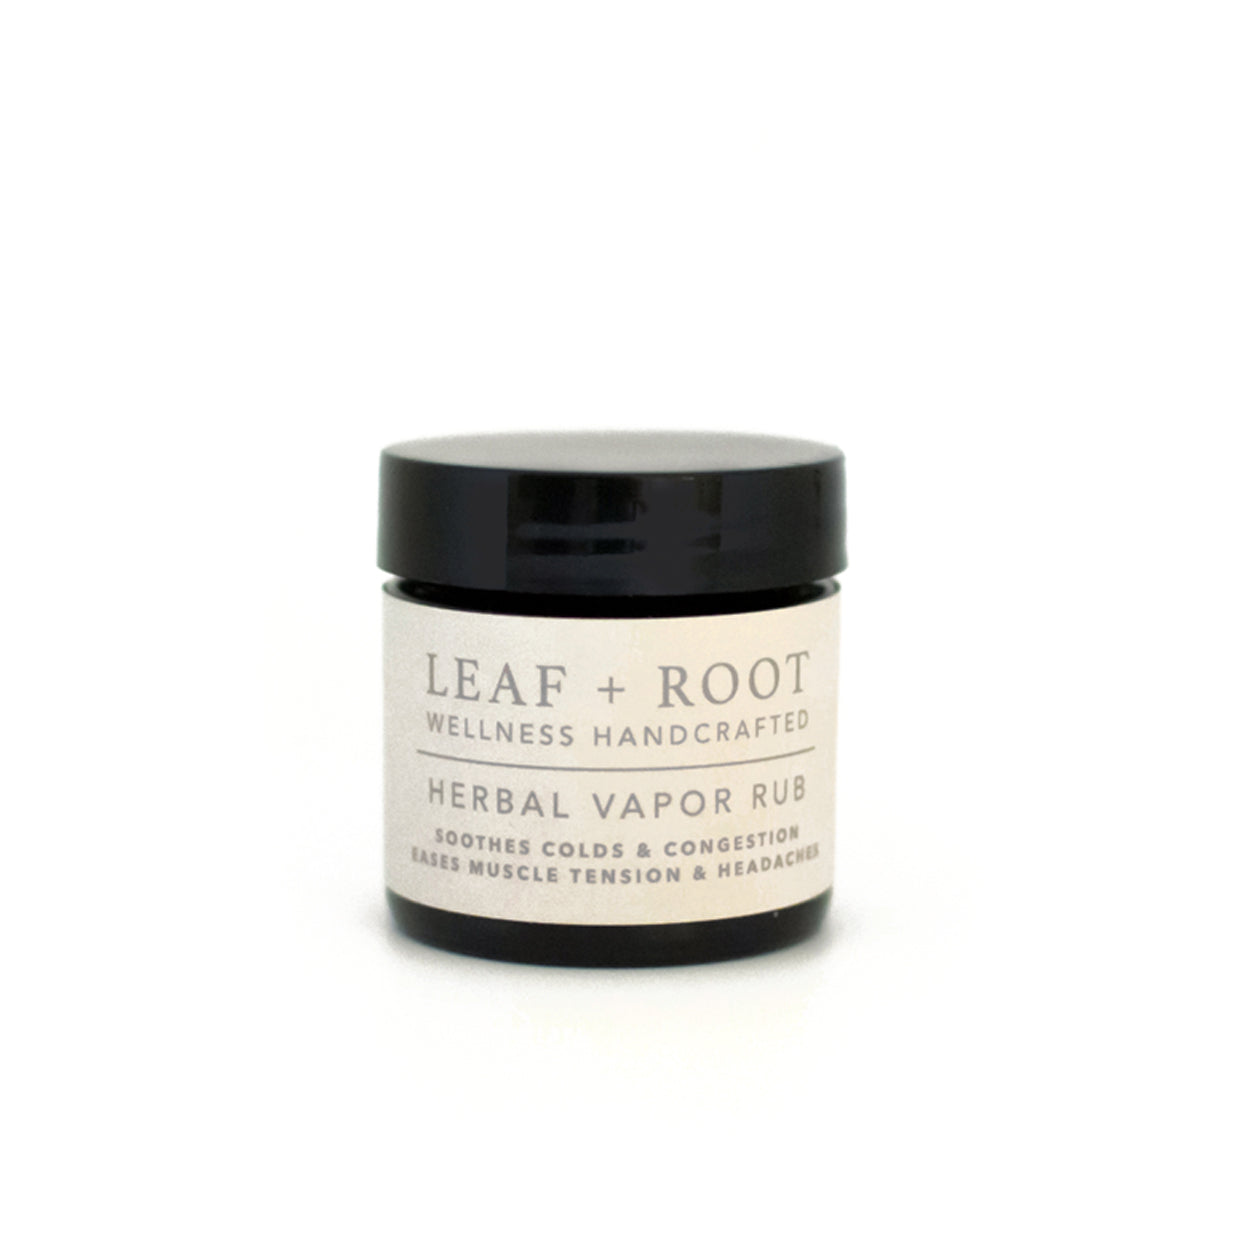 Herbal Vapor Rub by Leaf and Root